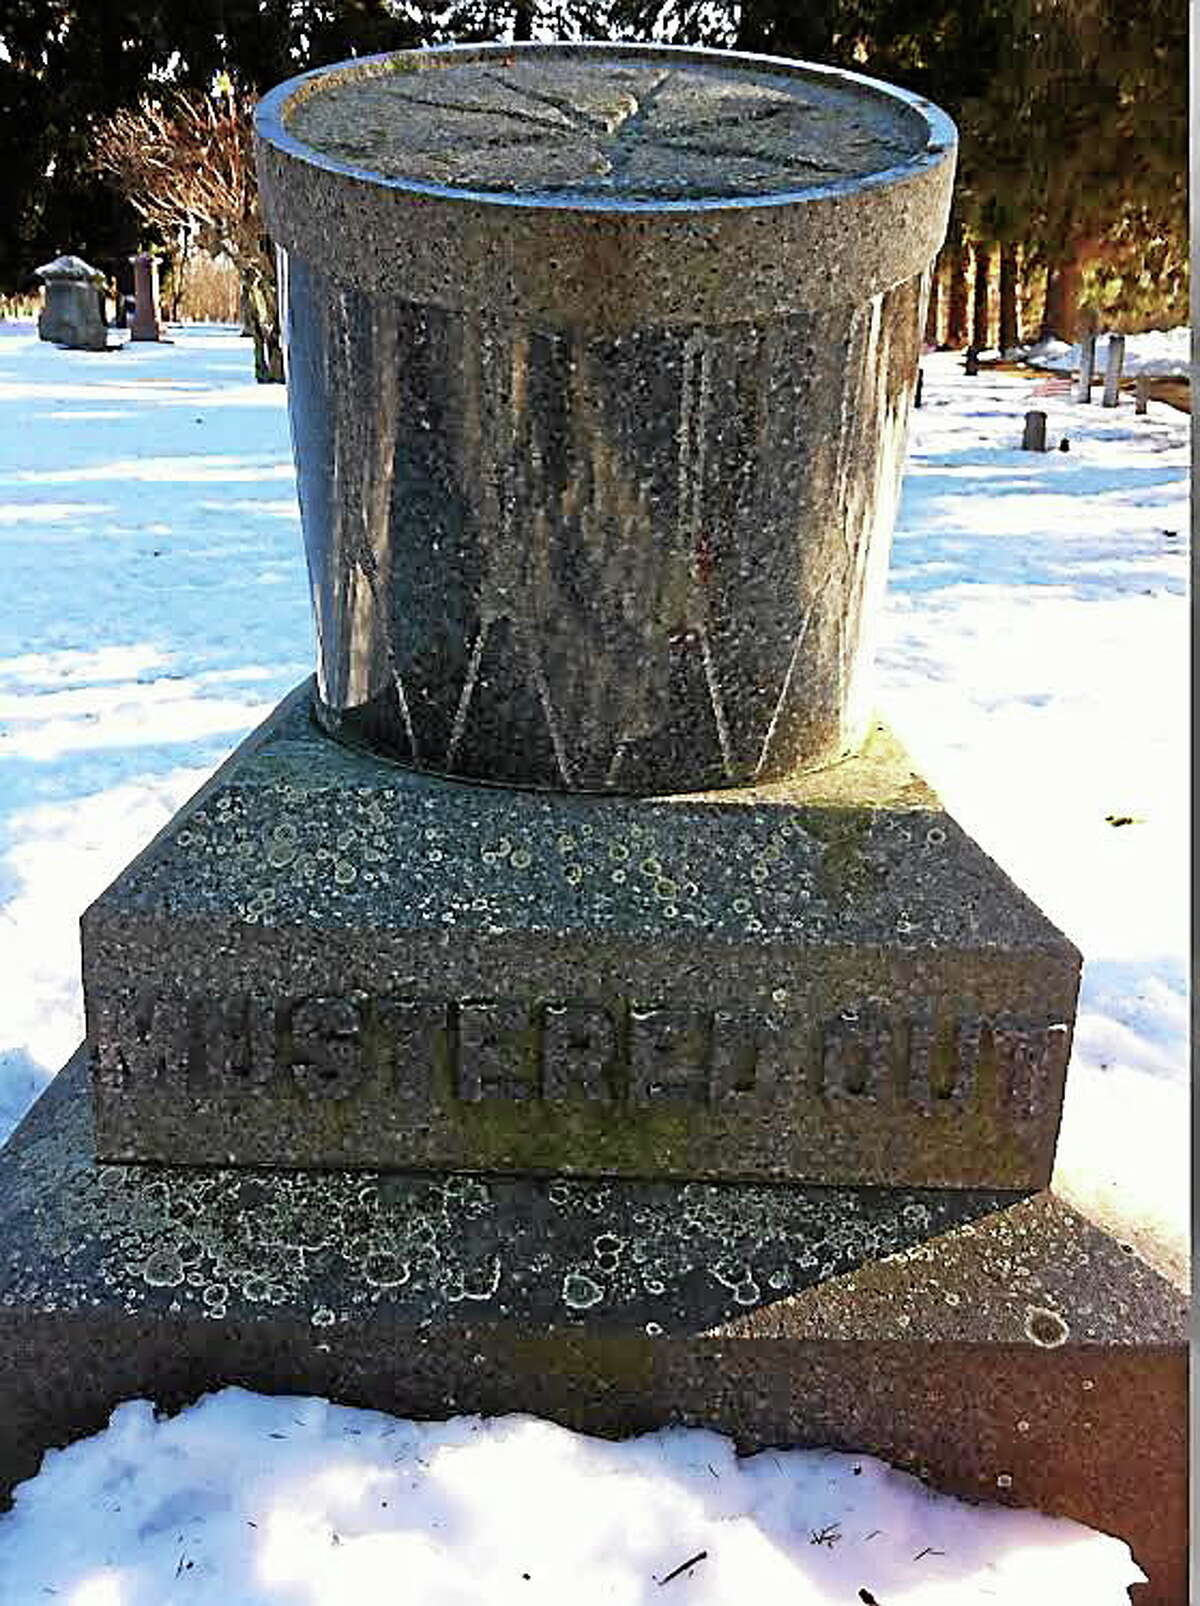 This Civil War monument in Soldiers’ Lot, West Cemetery, Litchfield, is a granite drum of the type used in military bands, mounted at an angle on a granite base.